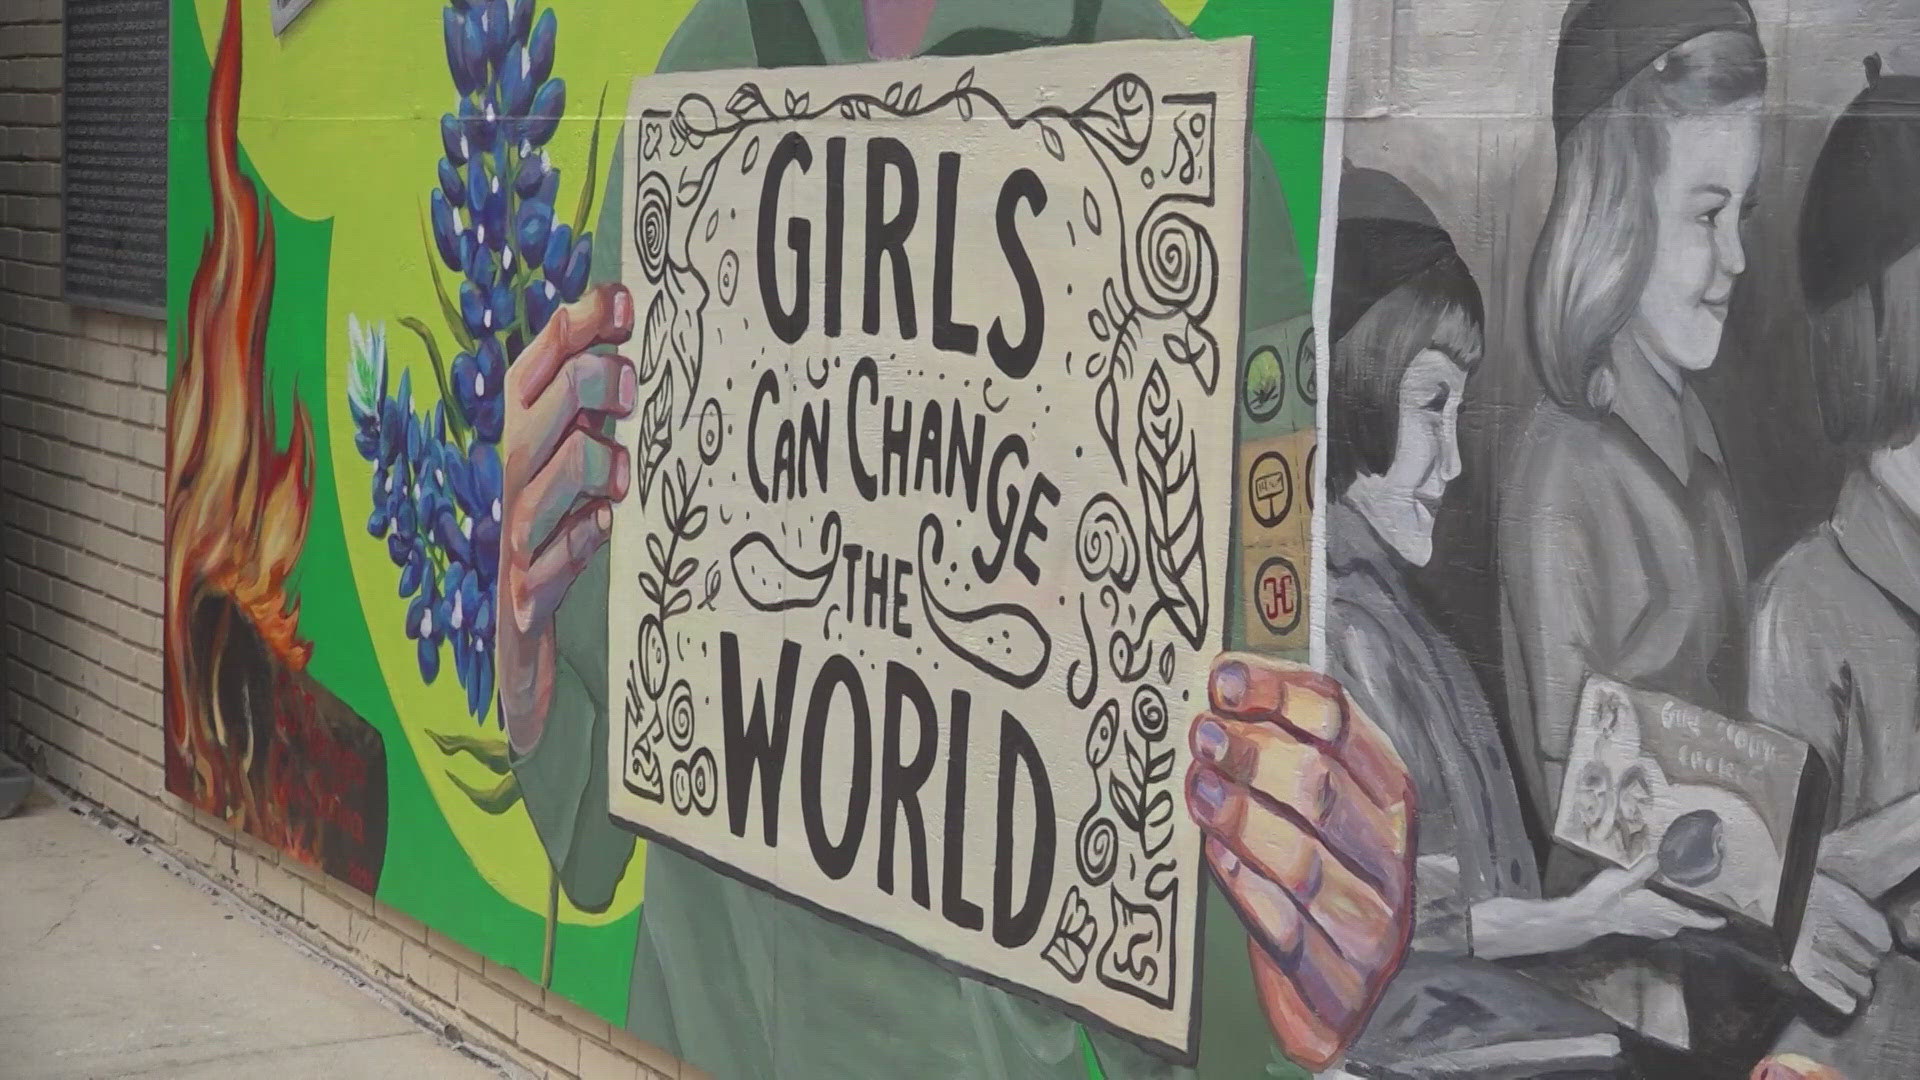 The mural is located in Main Plaza and celebrates 100 years of Girl Scouts.